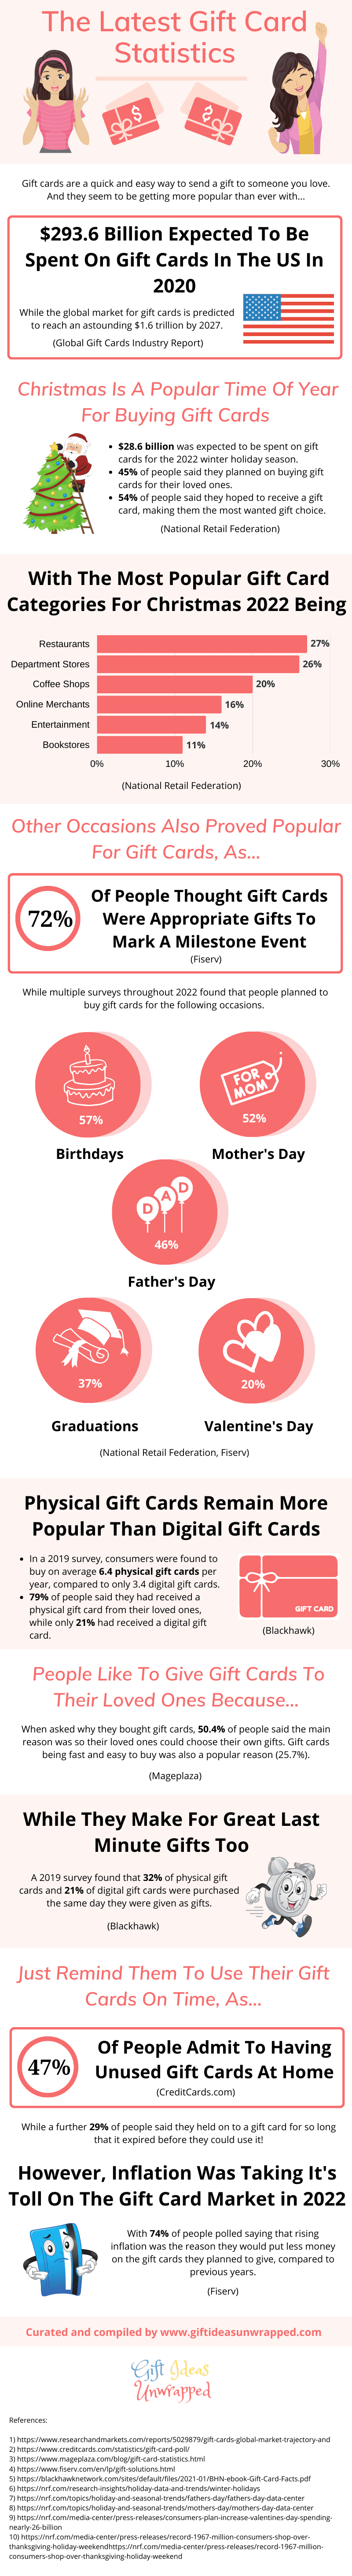 Gift Card statistics infographic